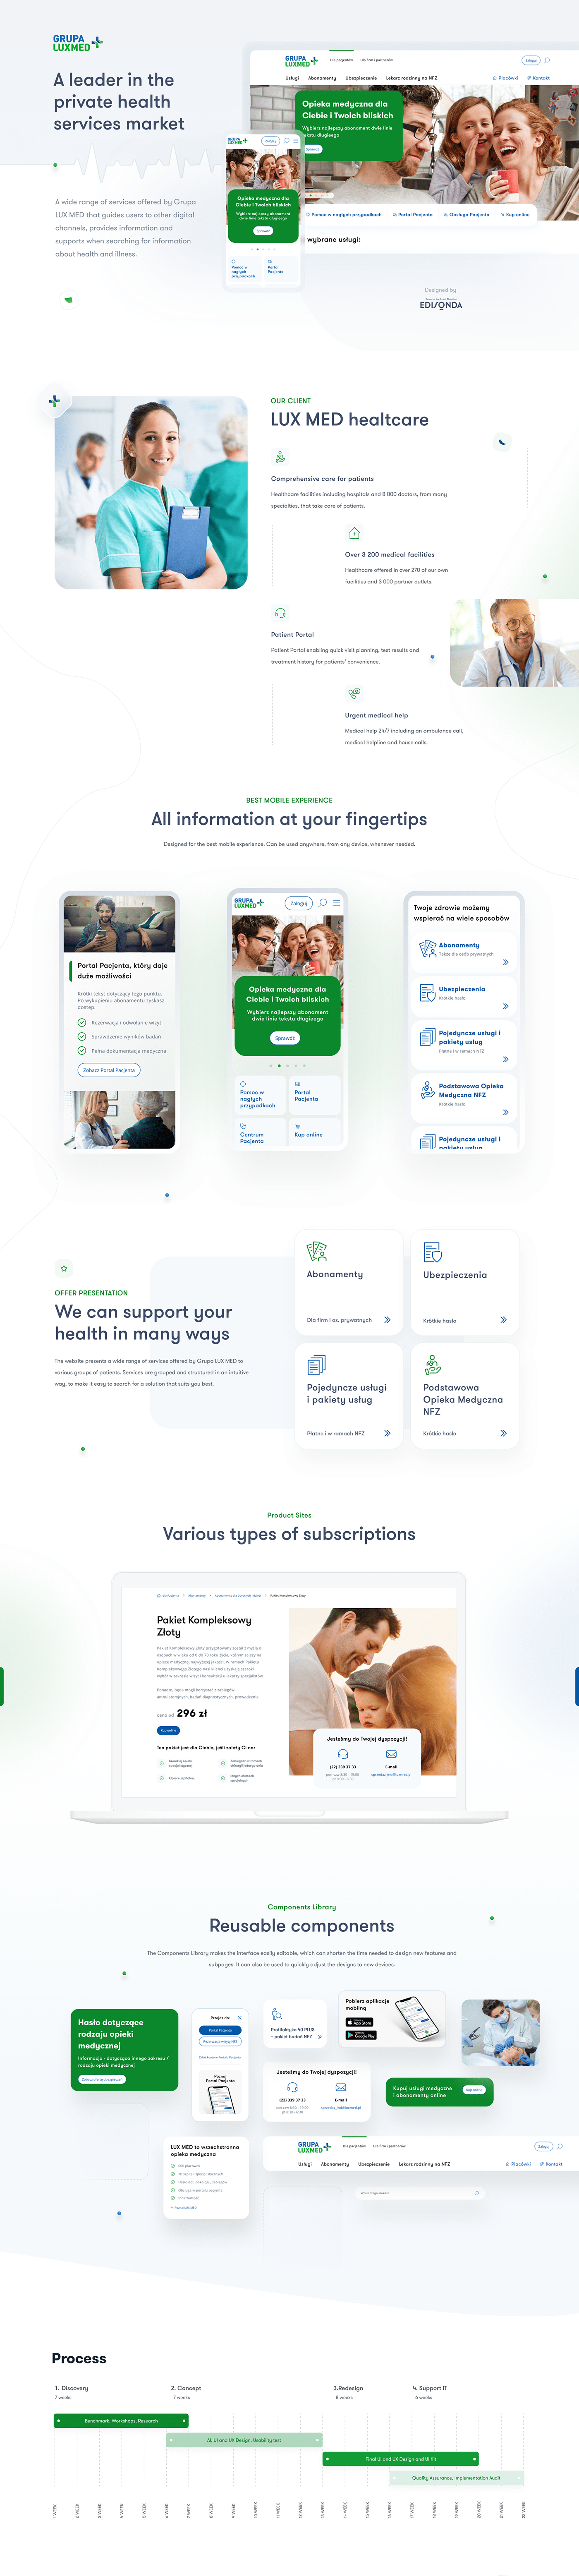 UI ux research healthcare Website user interface Experience UI/UX landing page UX design